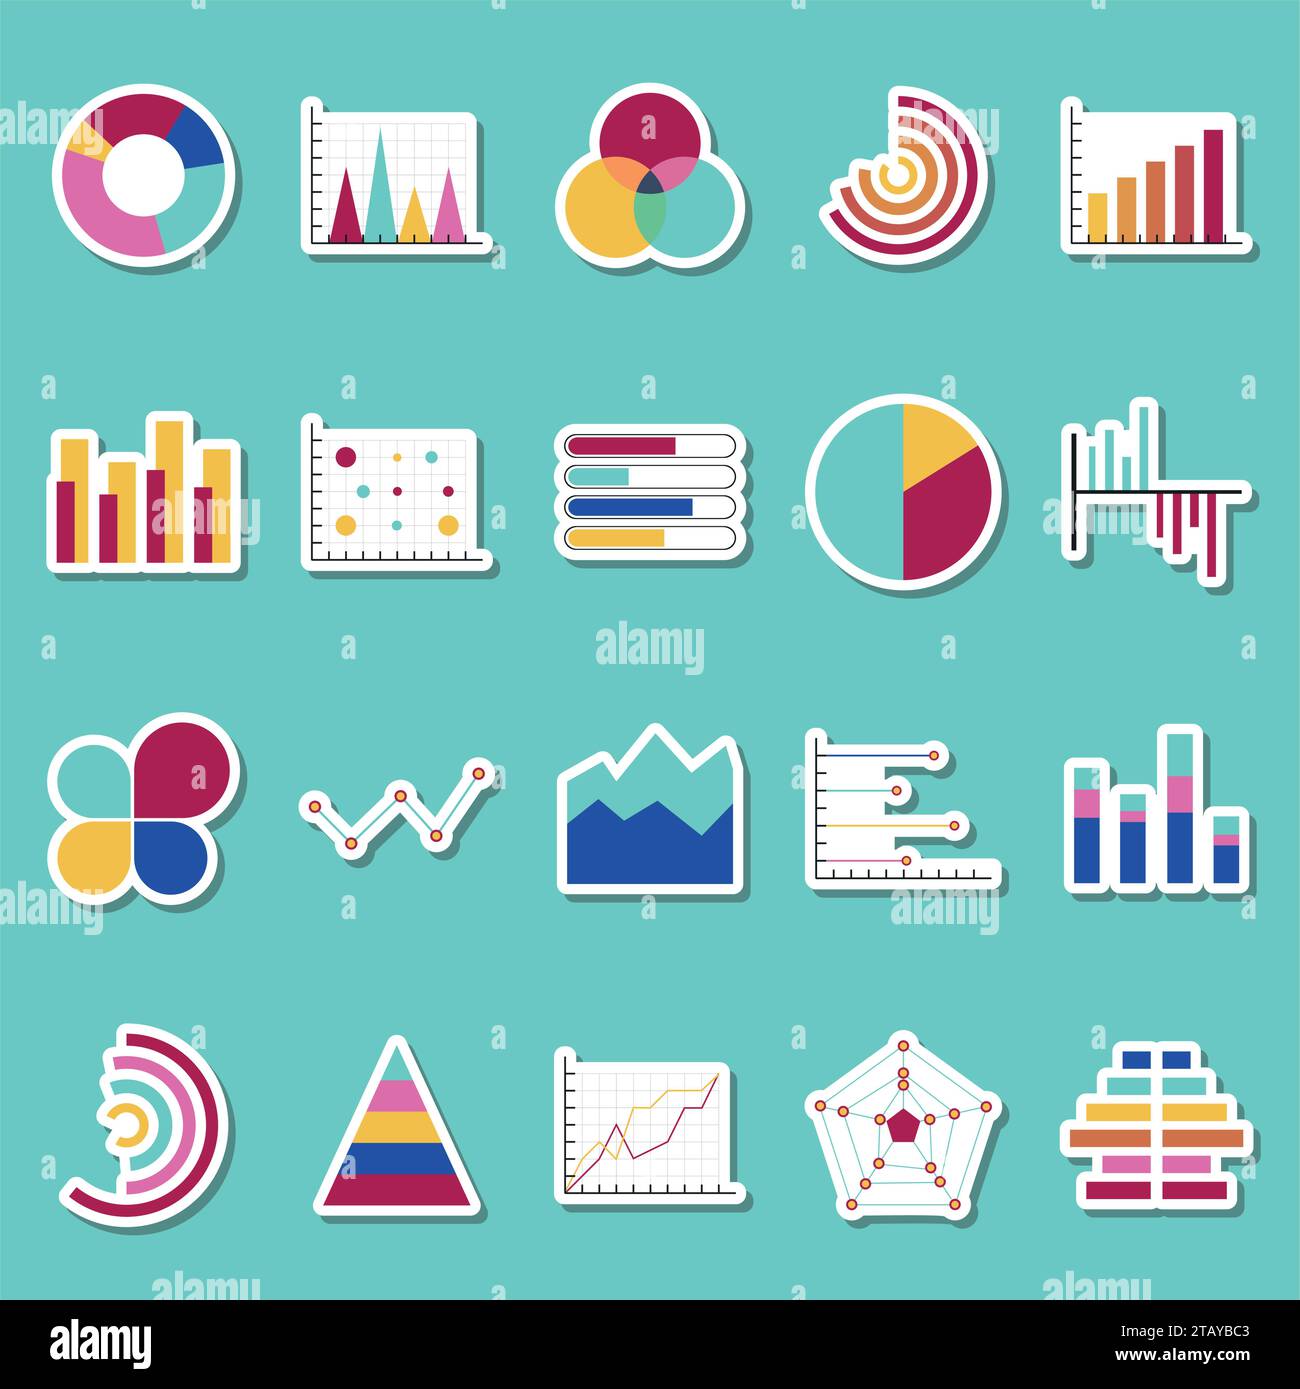 Business Data Graphs Stickers Icons Financial And Marketing Charts